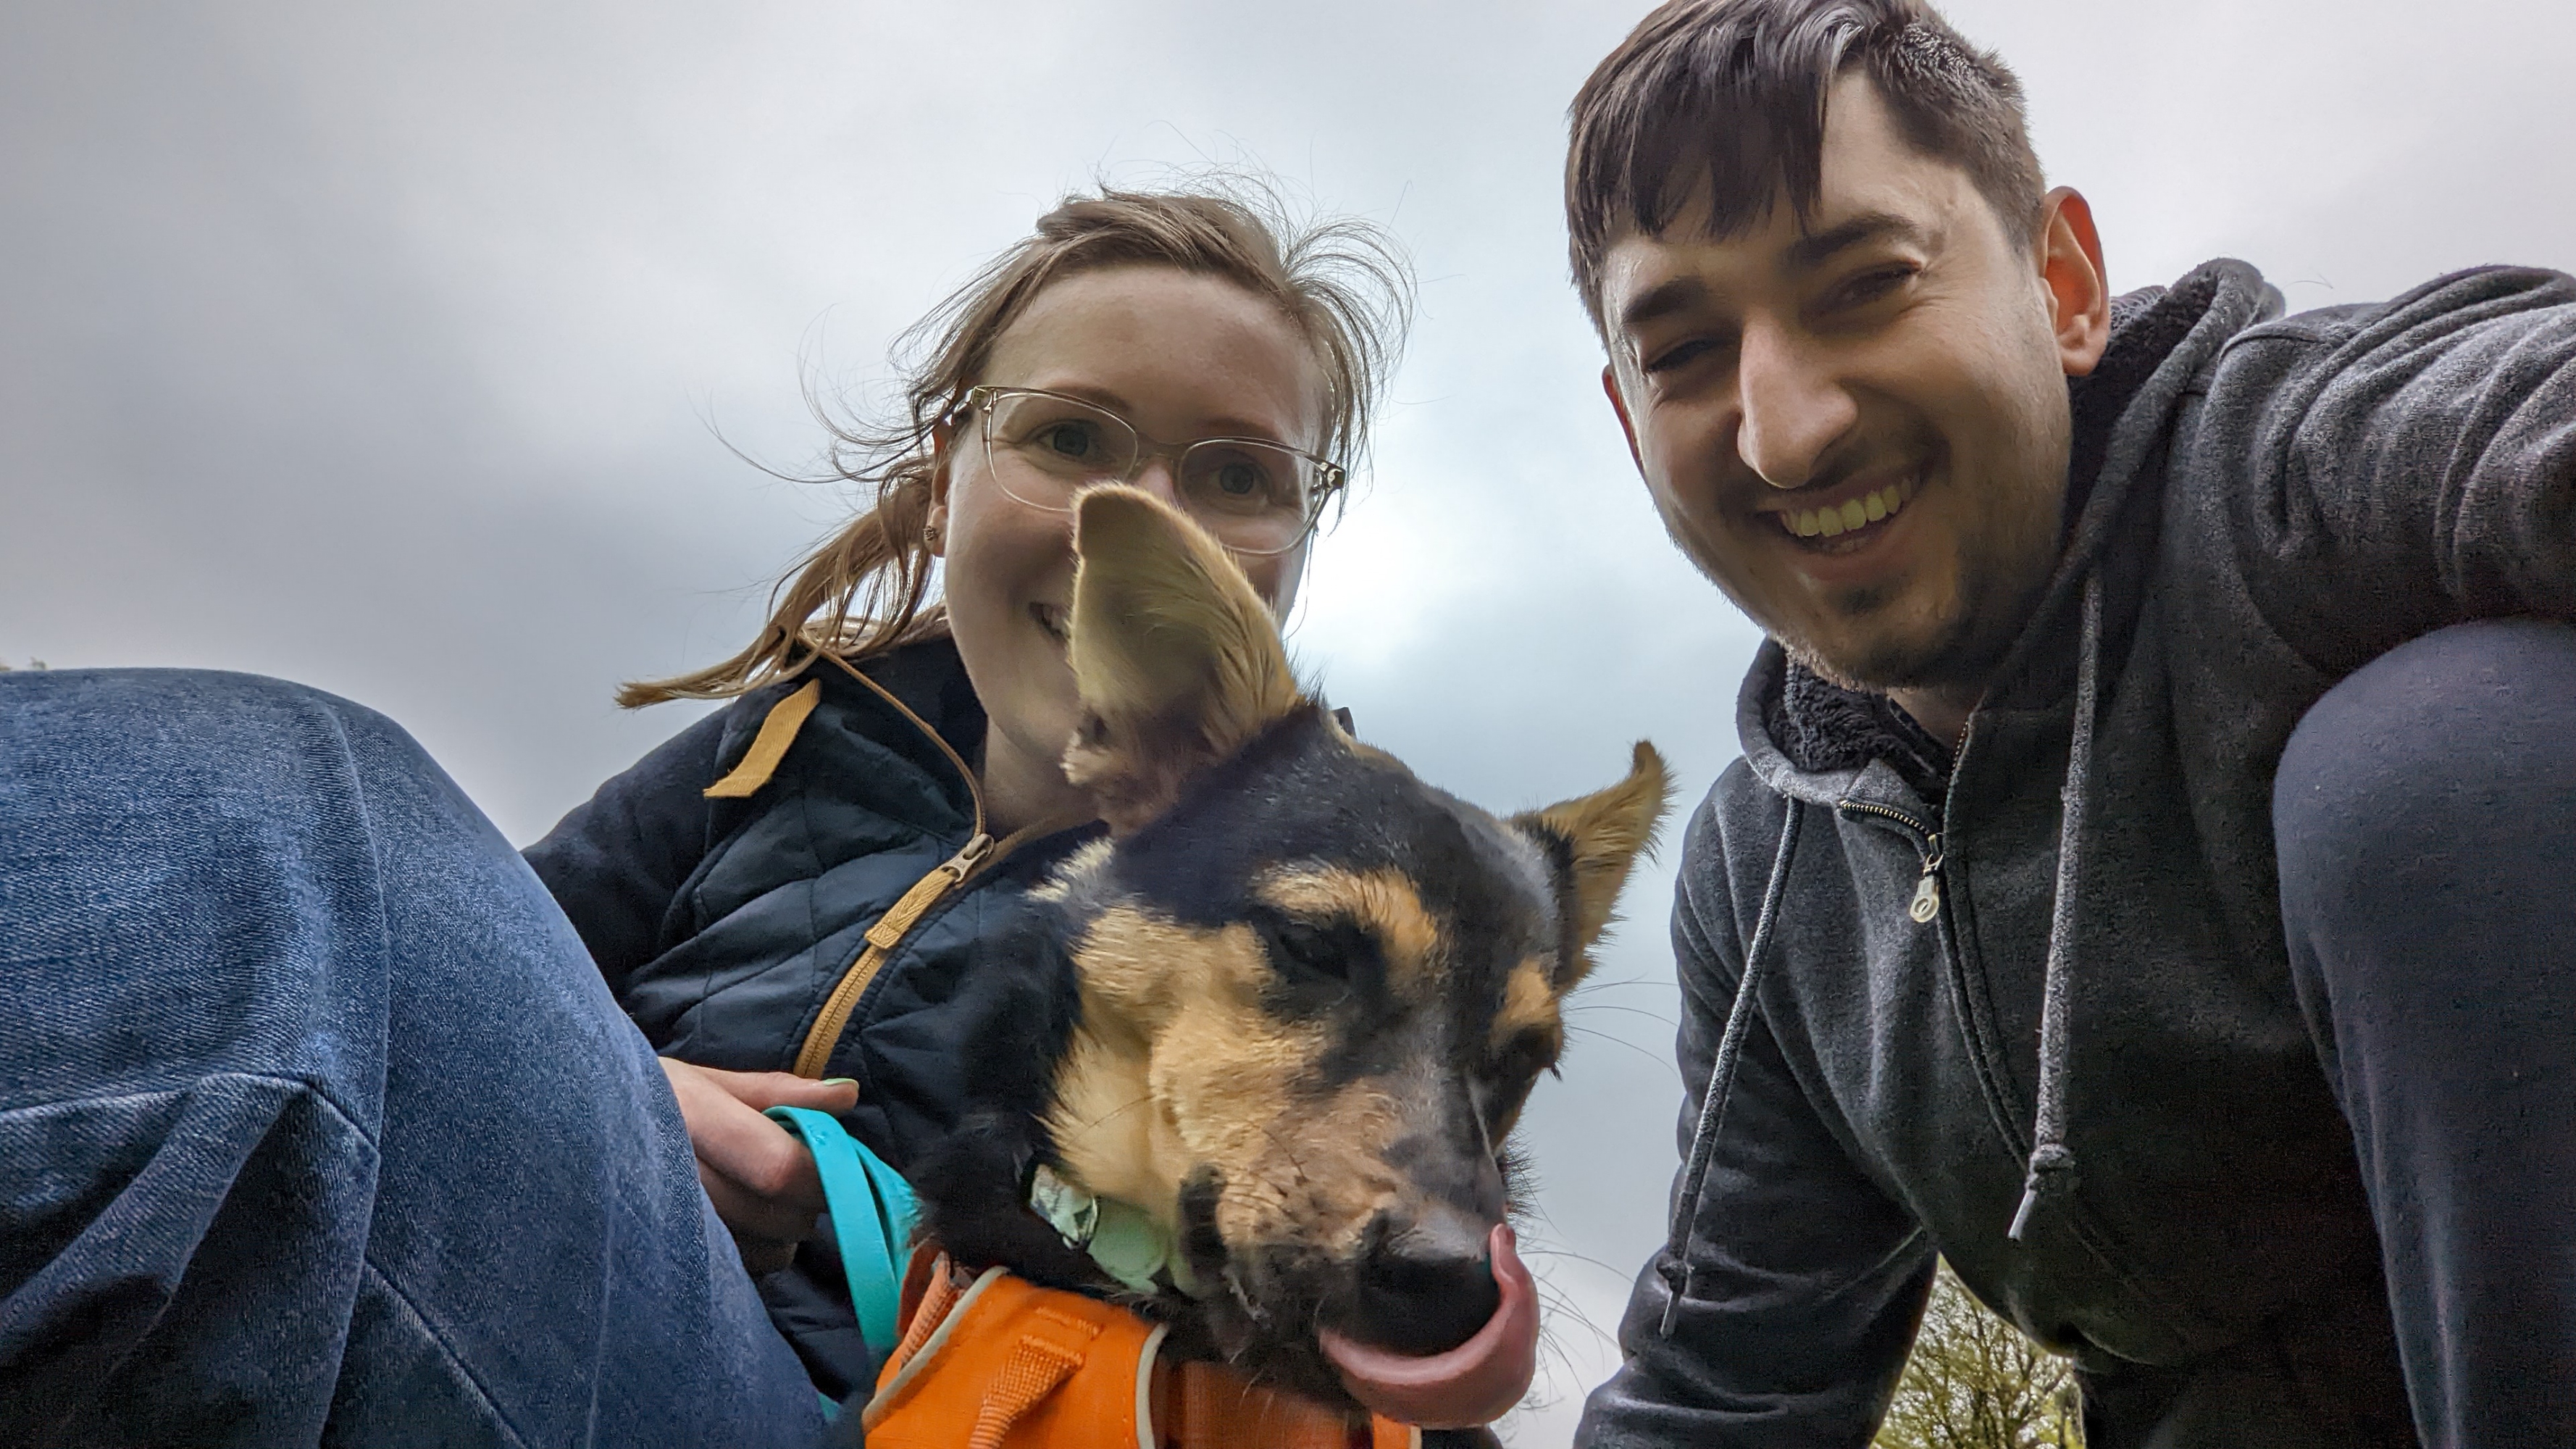 Selfie of Anna, Cookie and Jamie. Anna's face is partially obscured by Cookie the dog, who's in the middle of licking her lips, and looking slightly away from camera. Anna and Jamie are both smiling at the camera